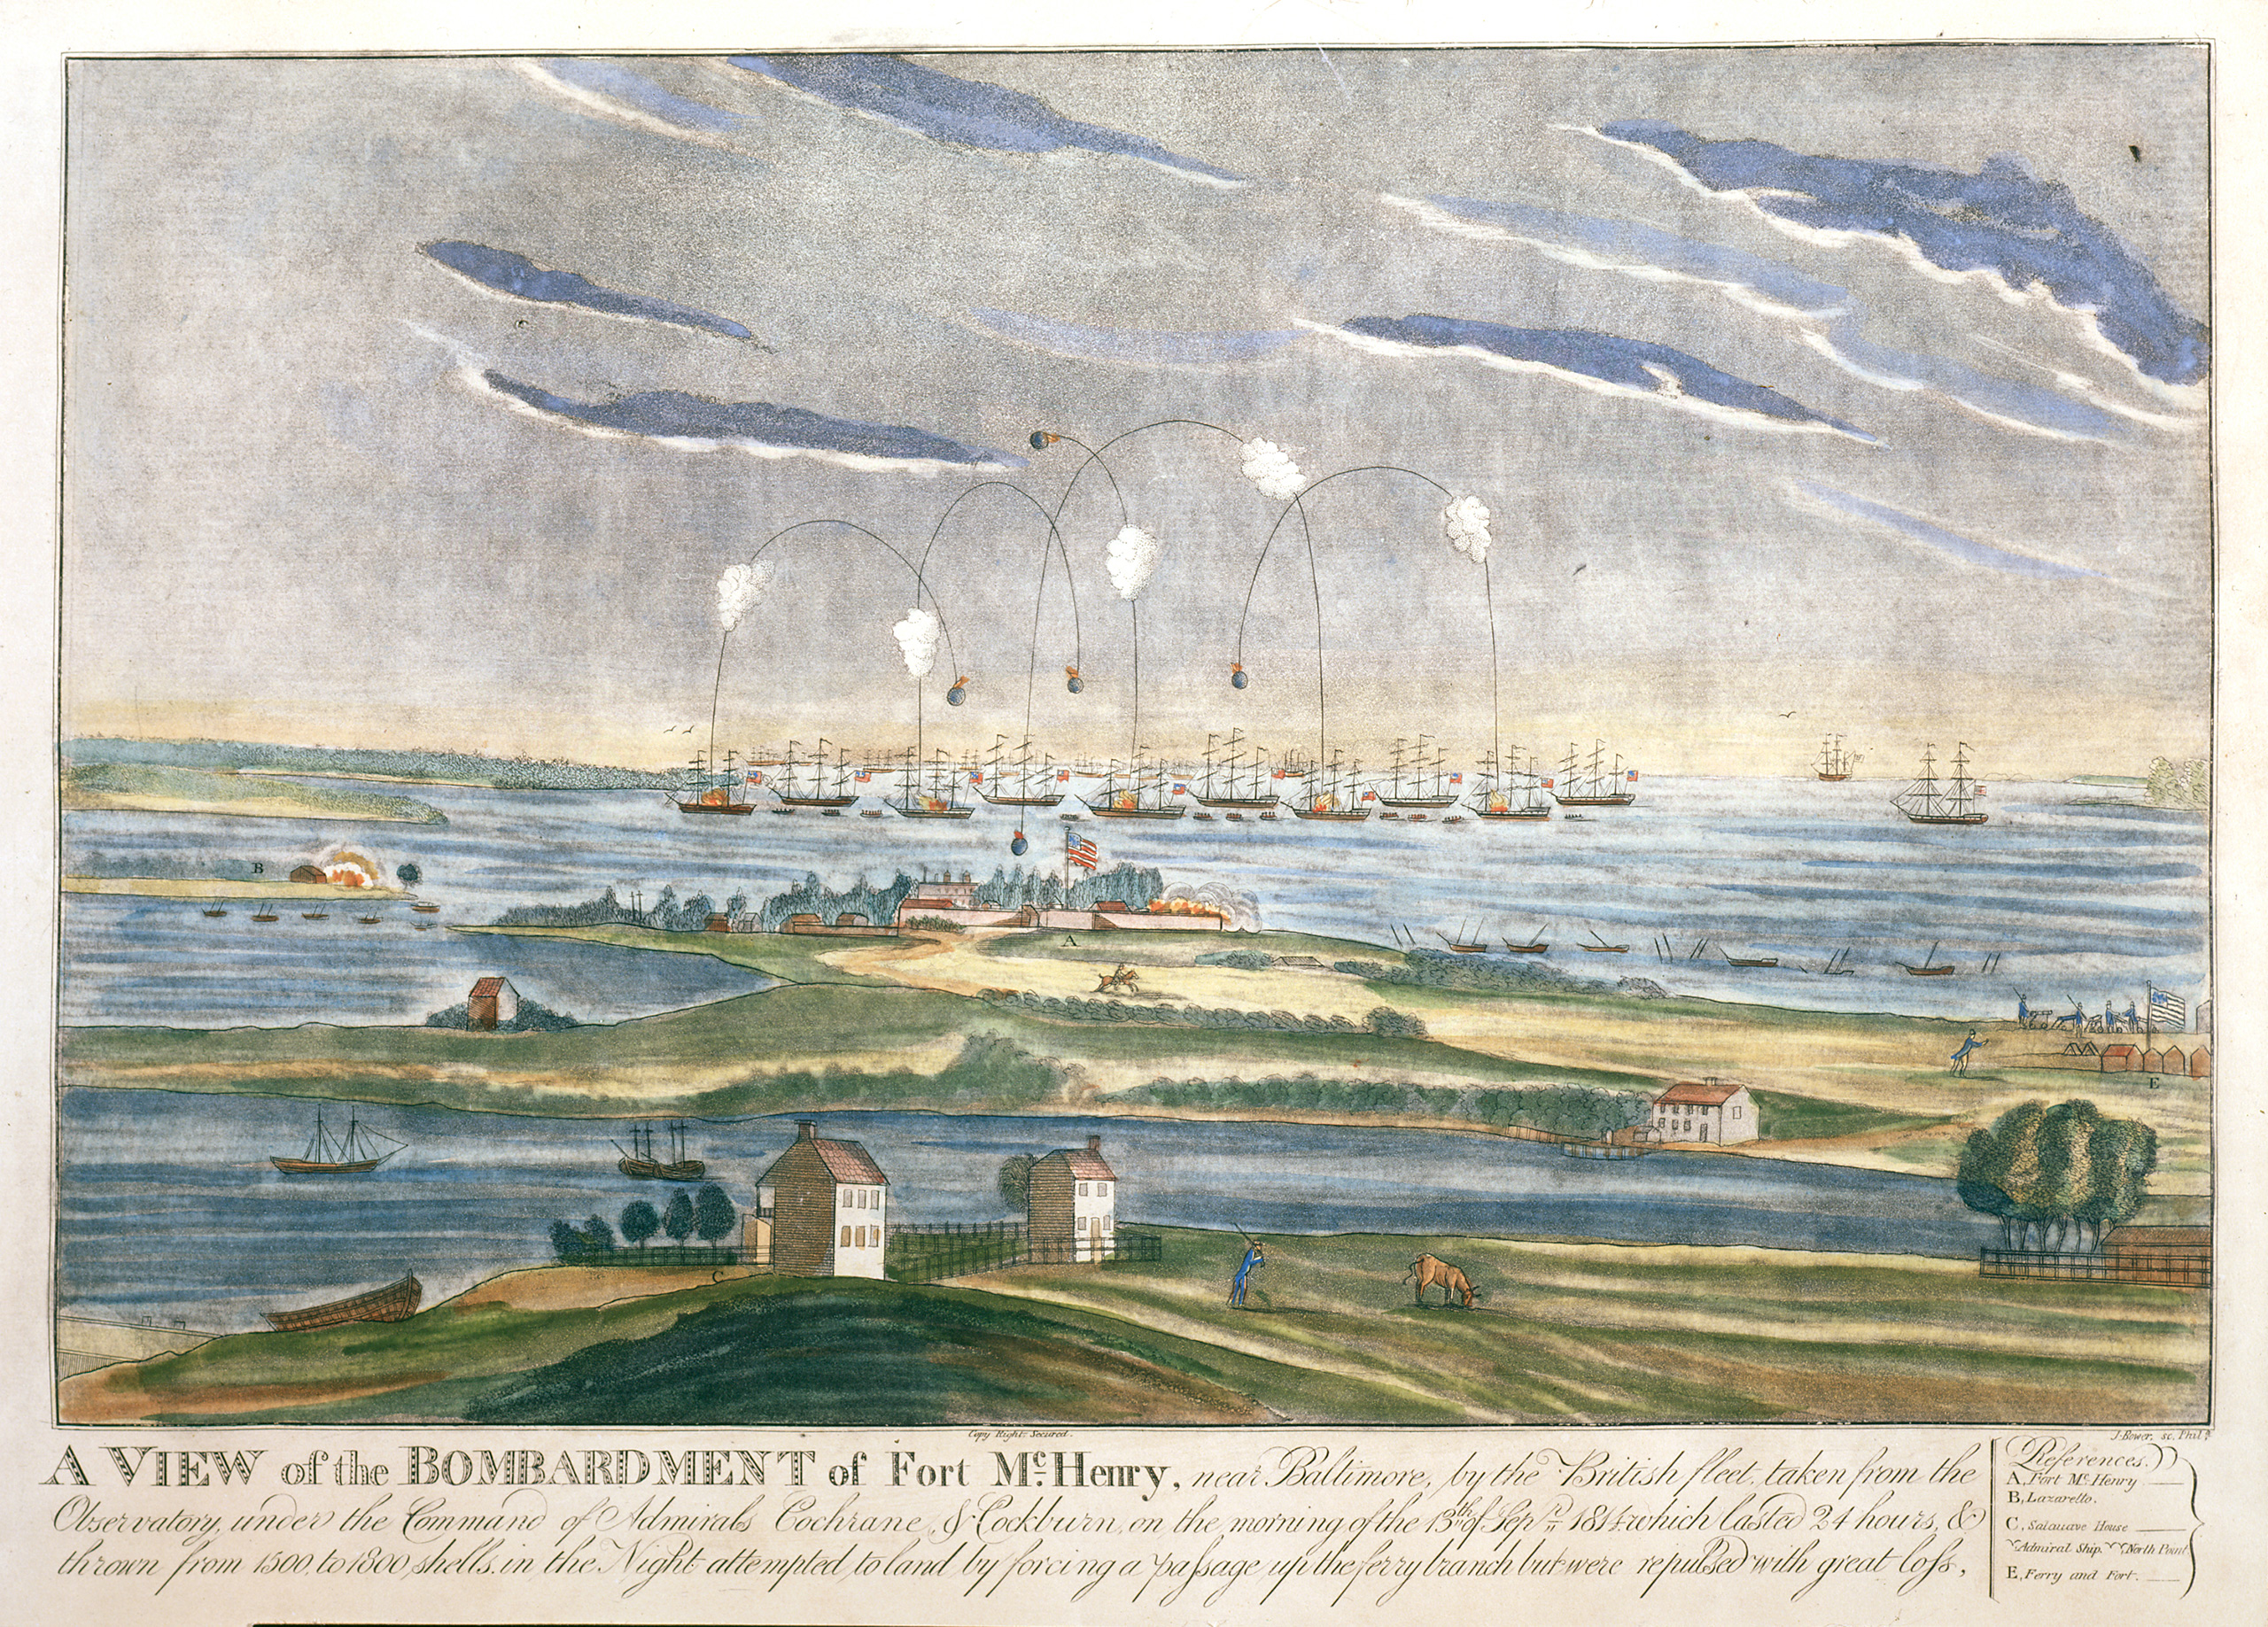 Artist John Bower&#x2019;s iconic painting &#x201C;A View of the Bombardment of Fort McHenry&#x201D; was finished in 1814 and depicts the flag still flying during the battle between US and British forces on September 13 of that same year